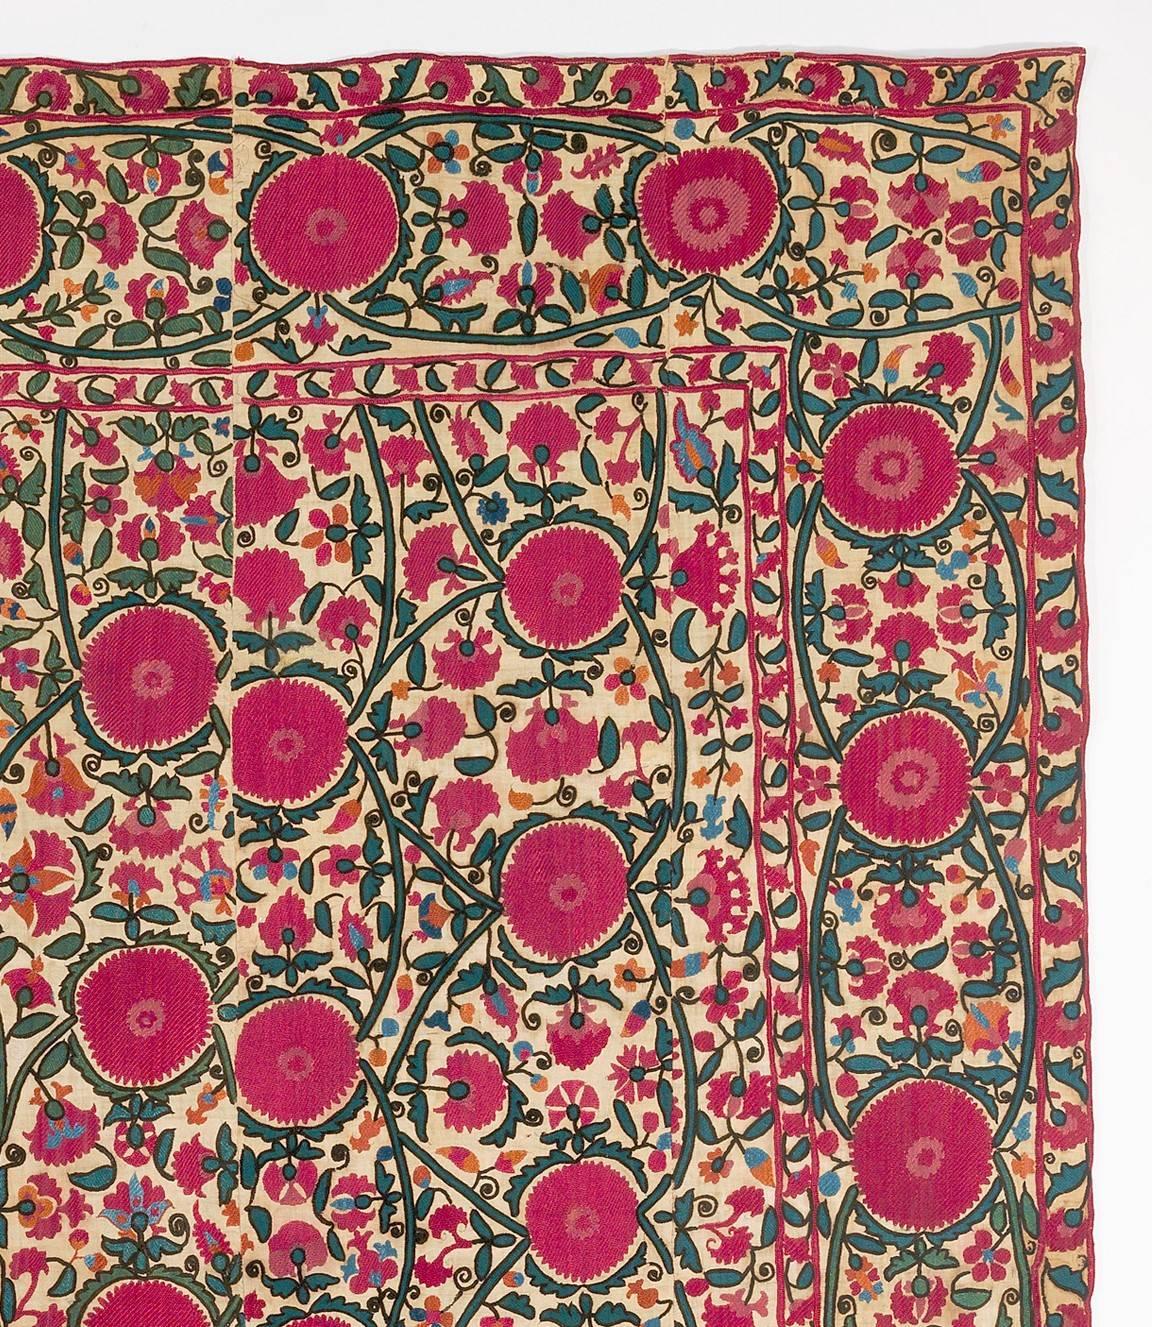 Antique Suzani Embroidery, 19th Century In Good Condition For Sale In London, GB